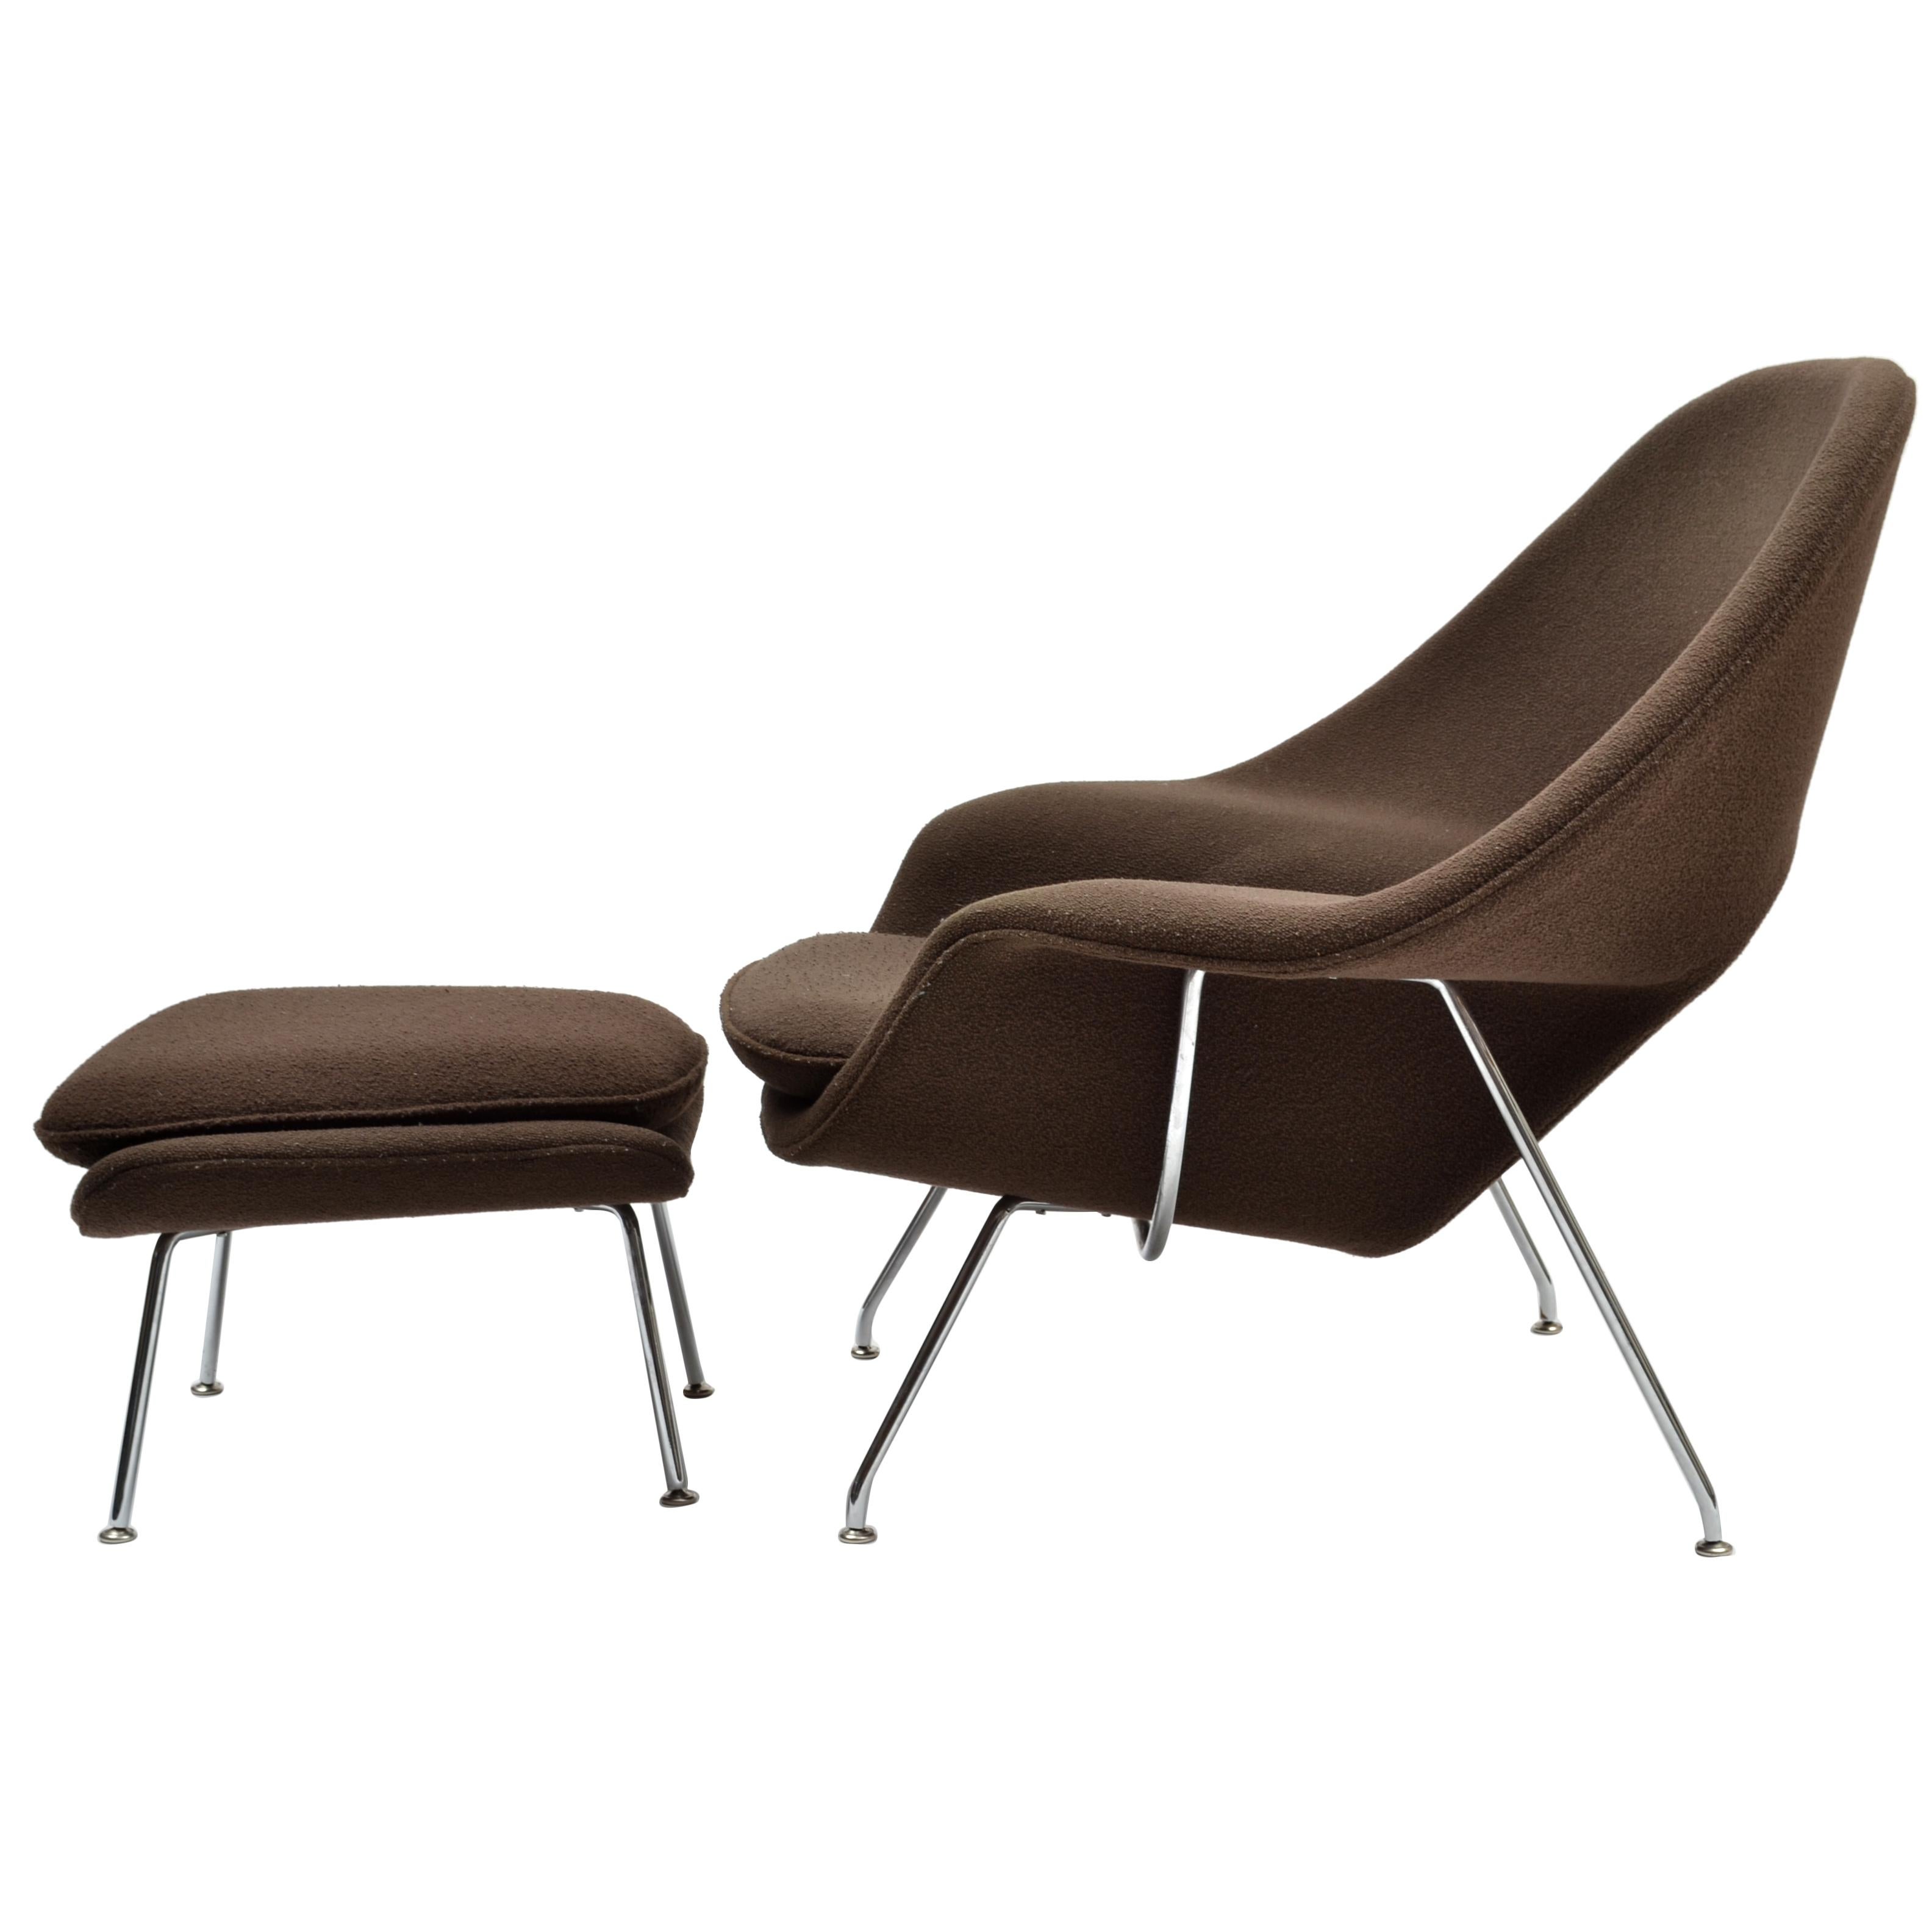 Eero Saarinen Womb Chair and Ottoman Produced by Knoll For Sale